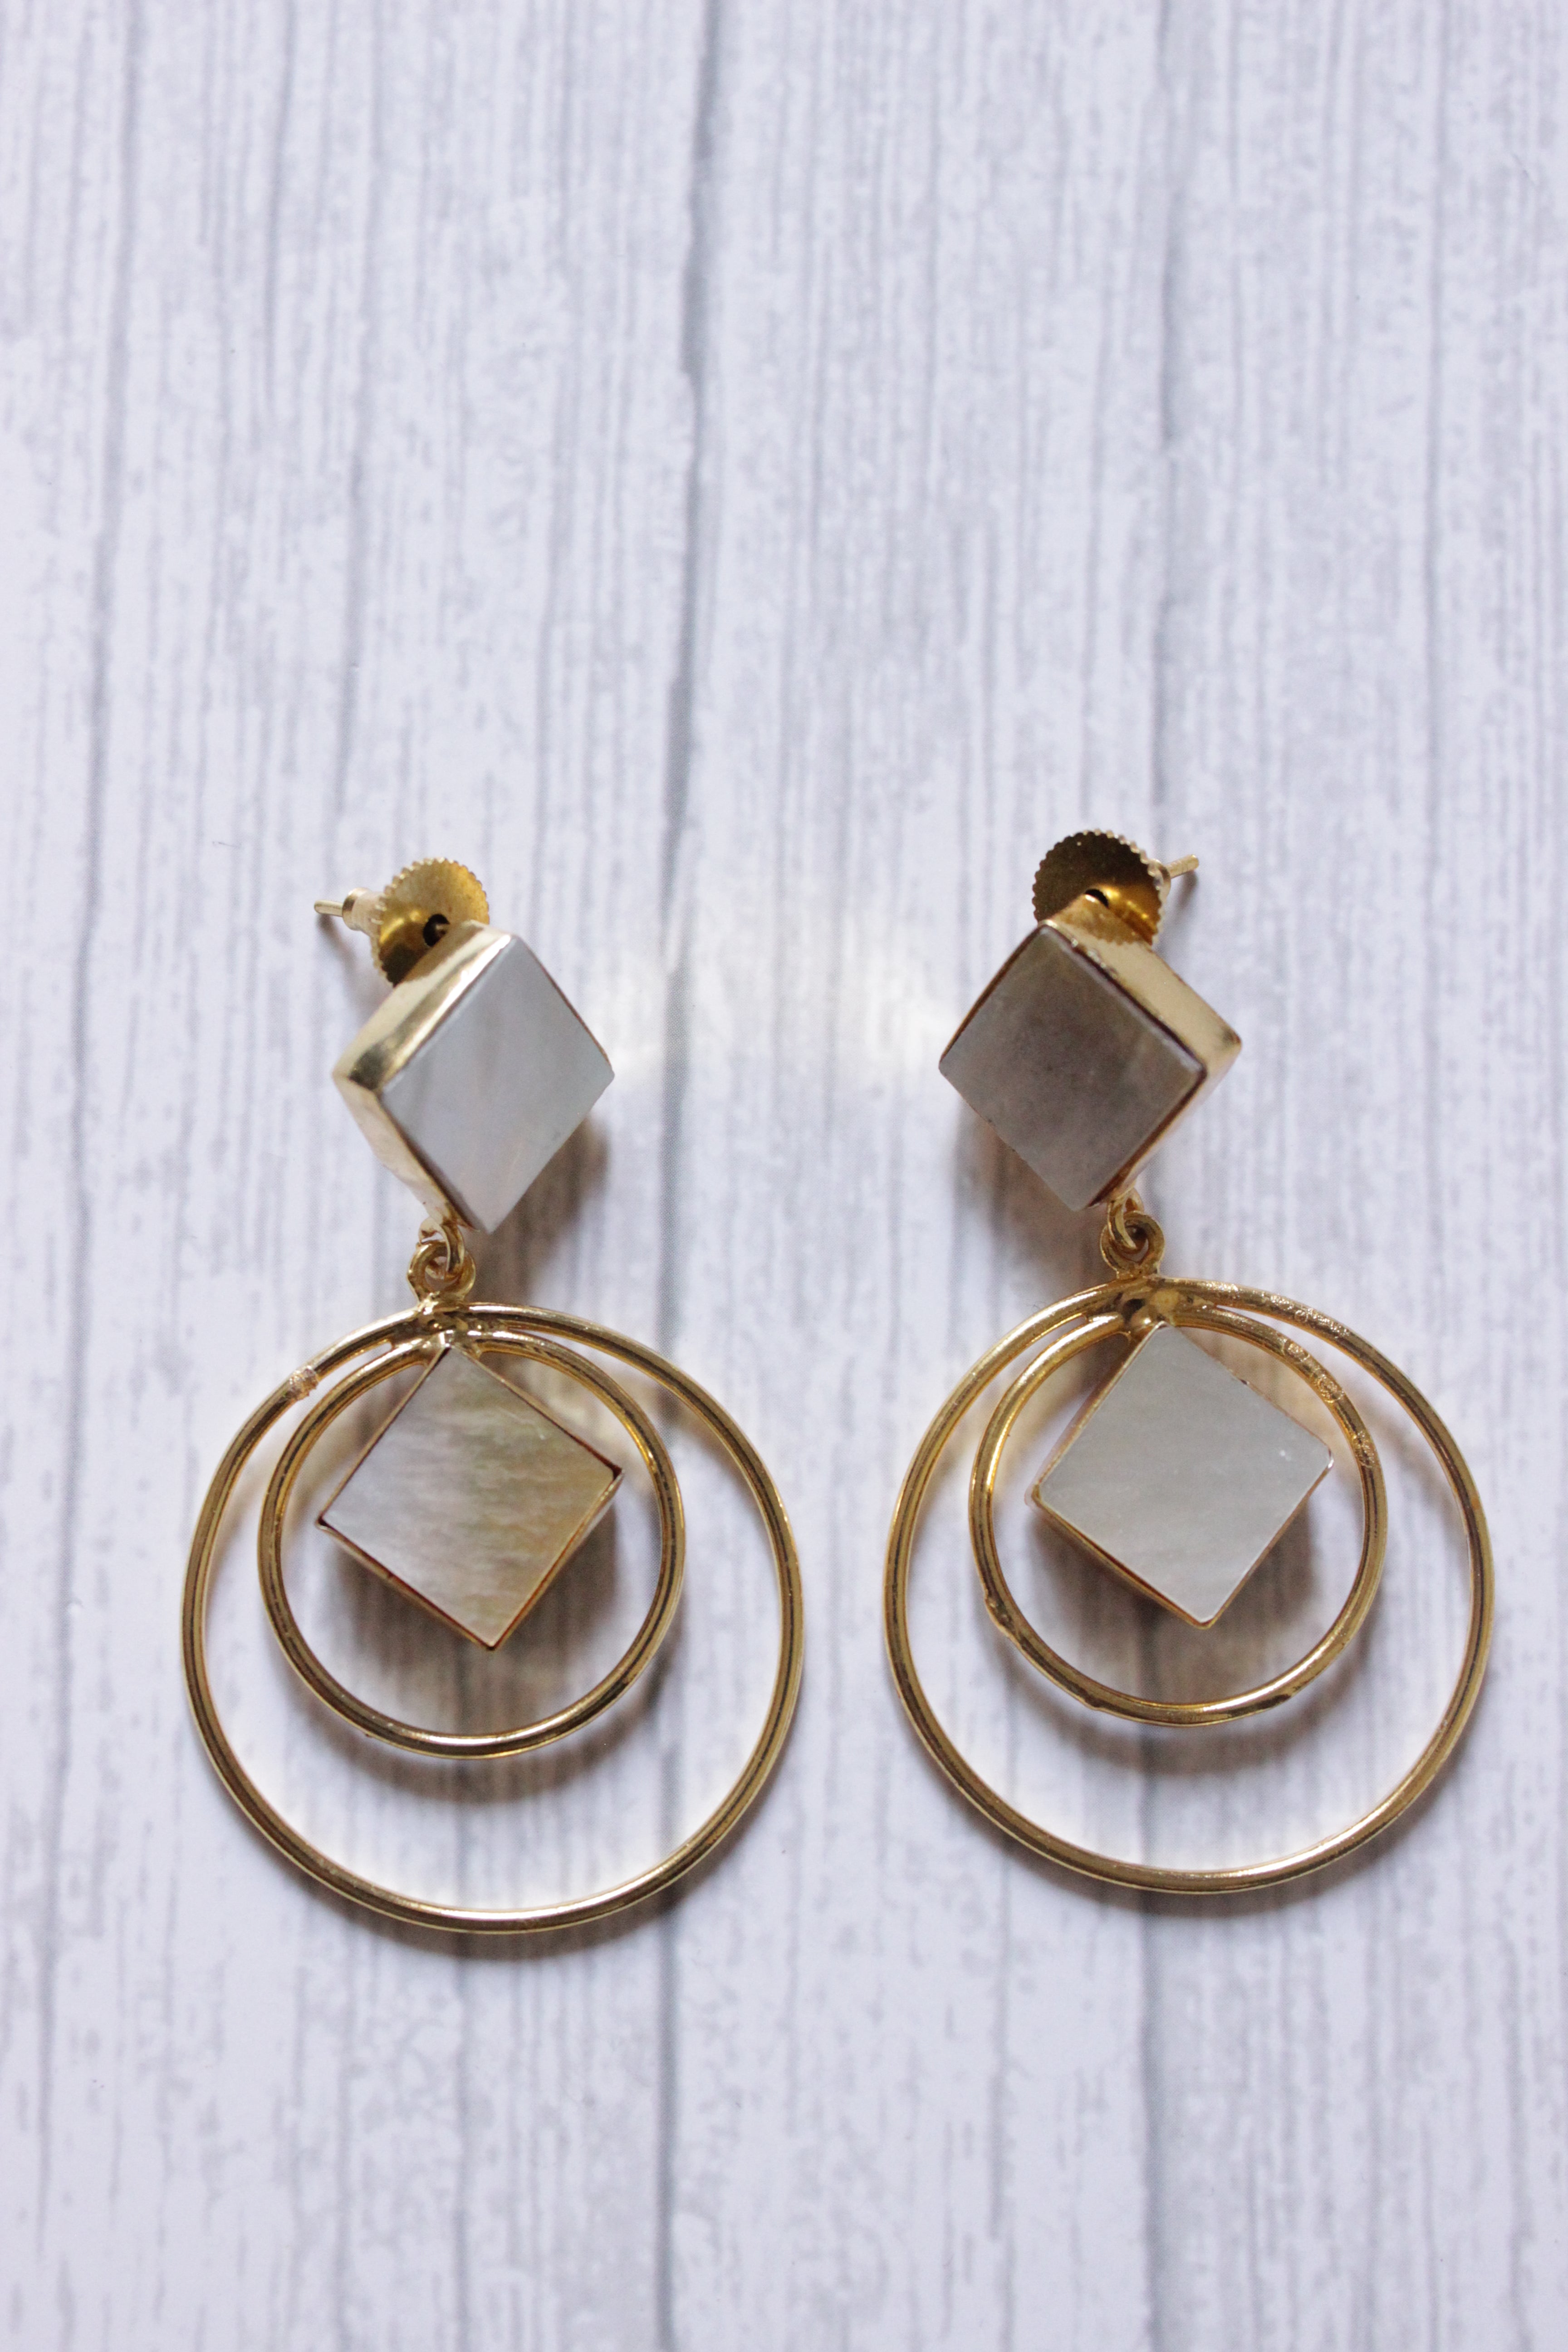 Concentric Circles Designer Mother of Pearl Gemstone Gold Plated Dangler Earrings